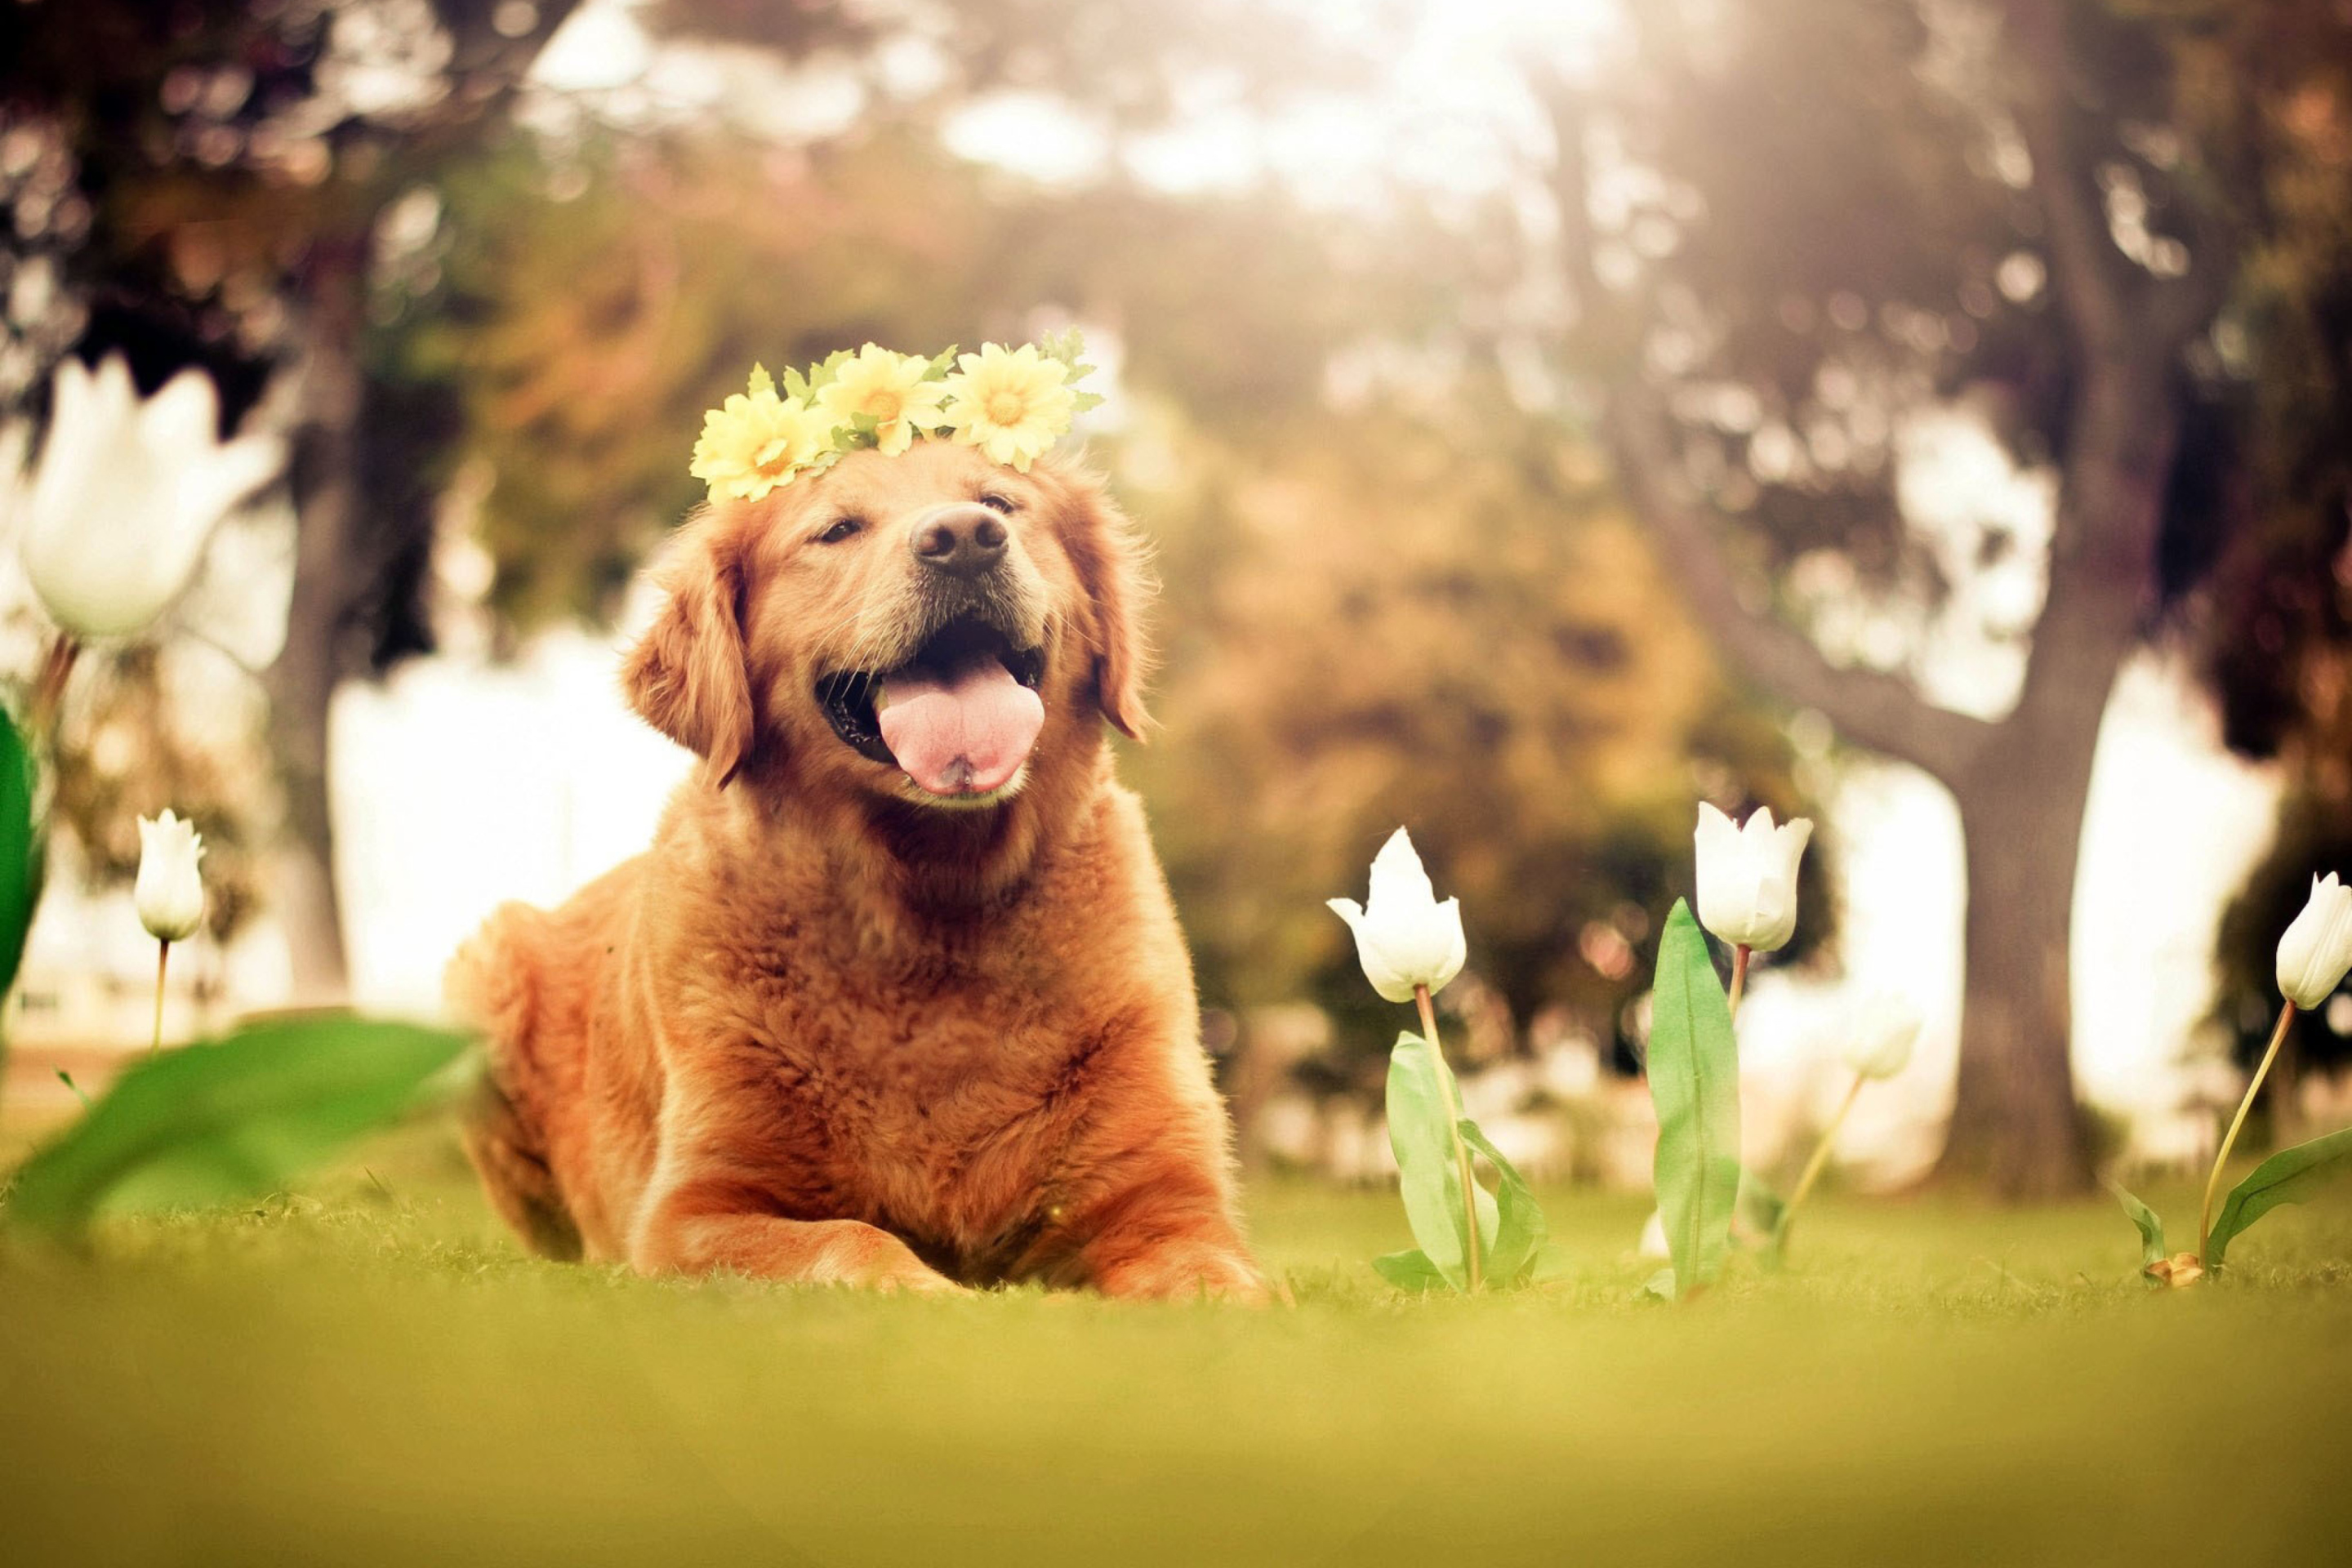 Ginger Dog With Flower Wreath wallpaper 2880x1920